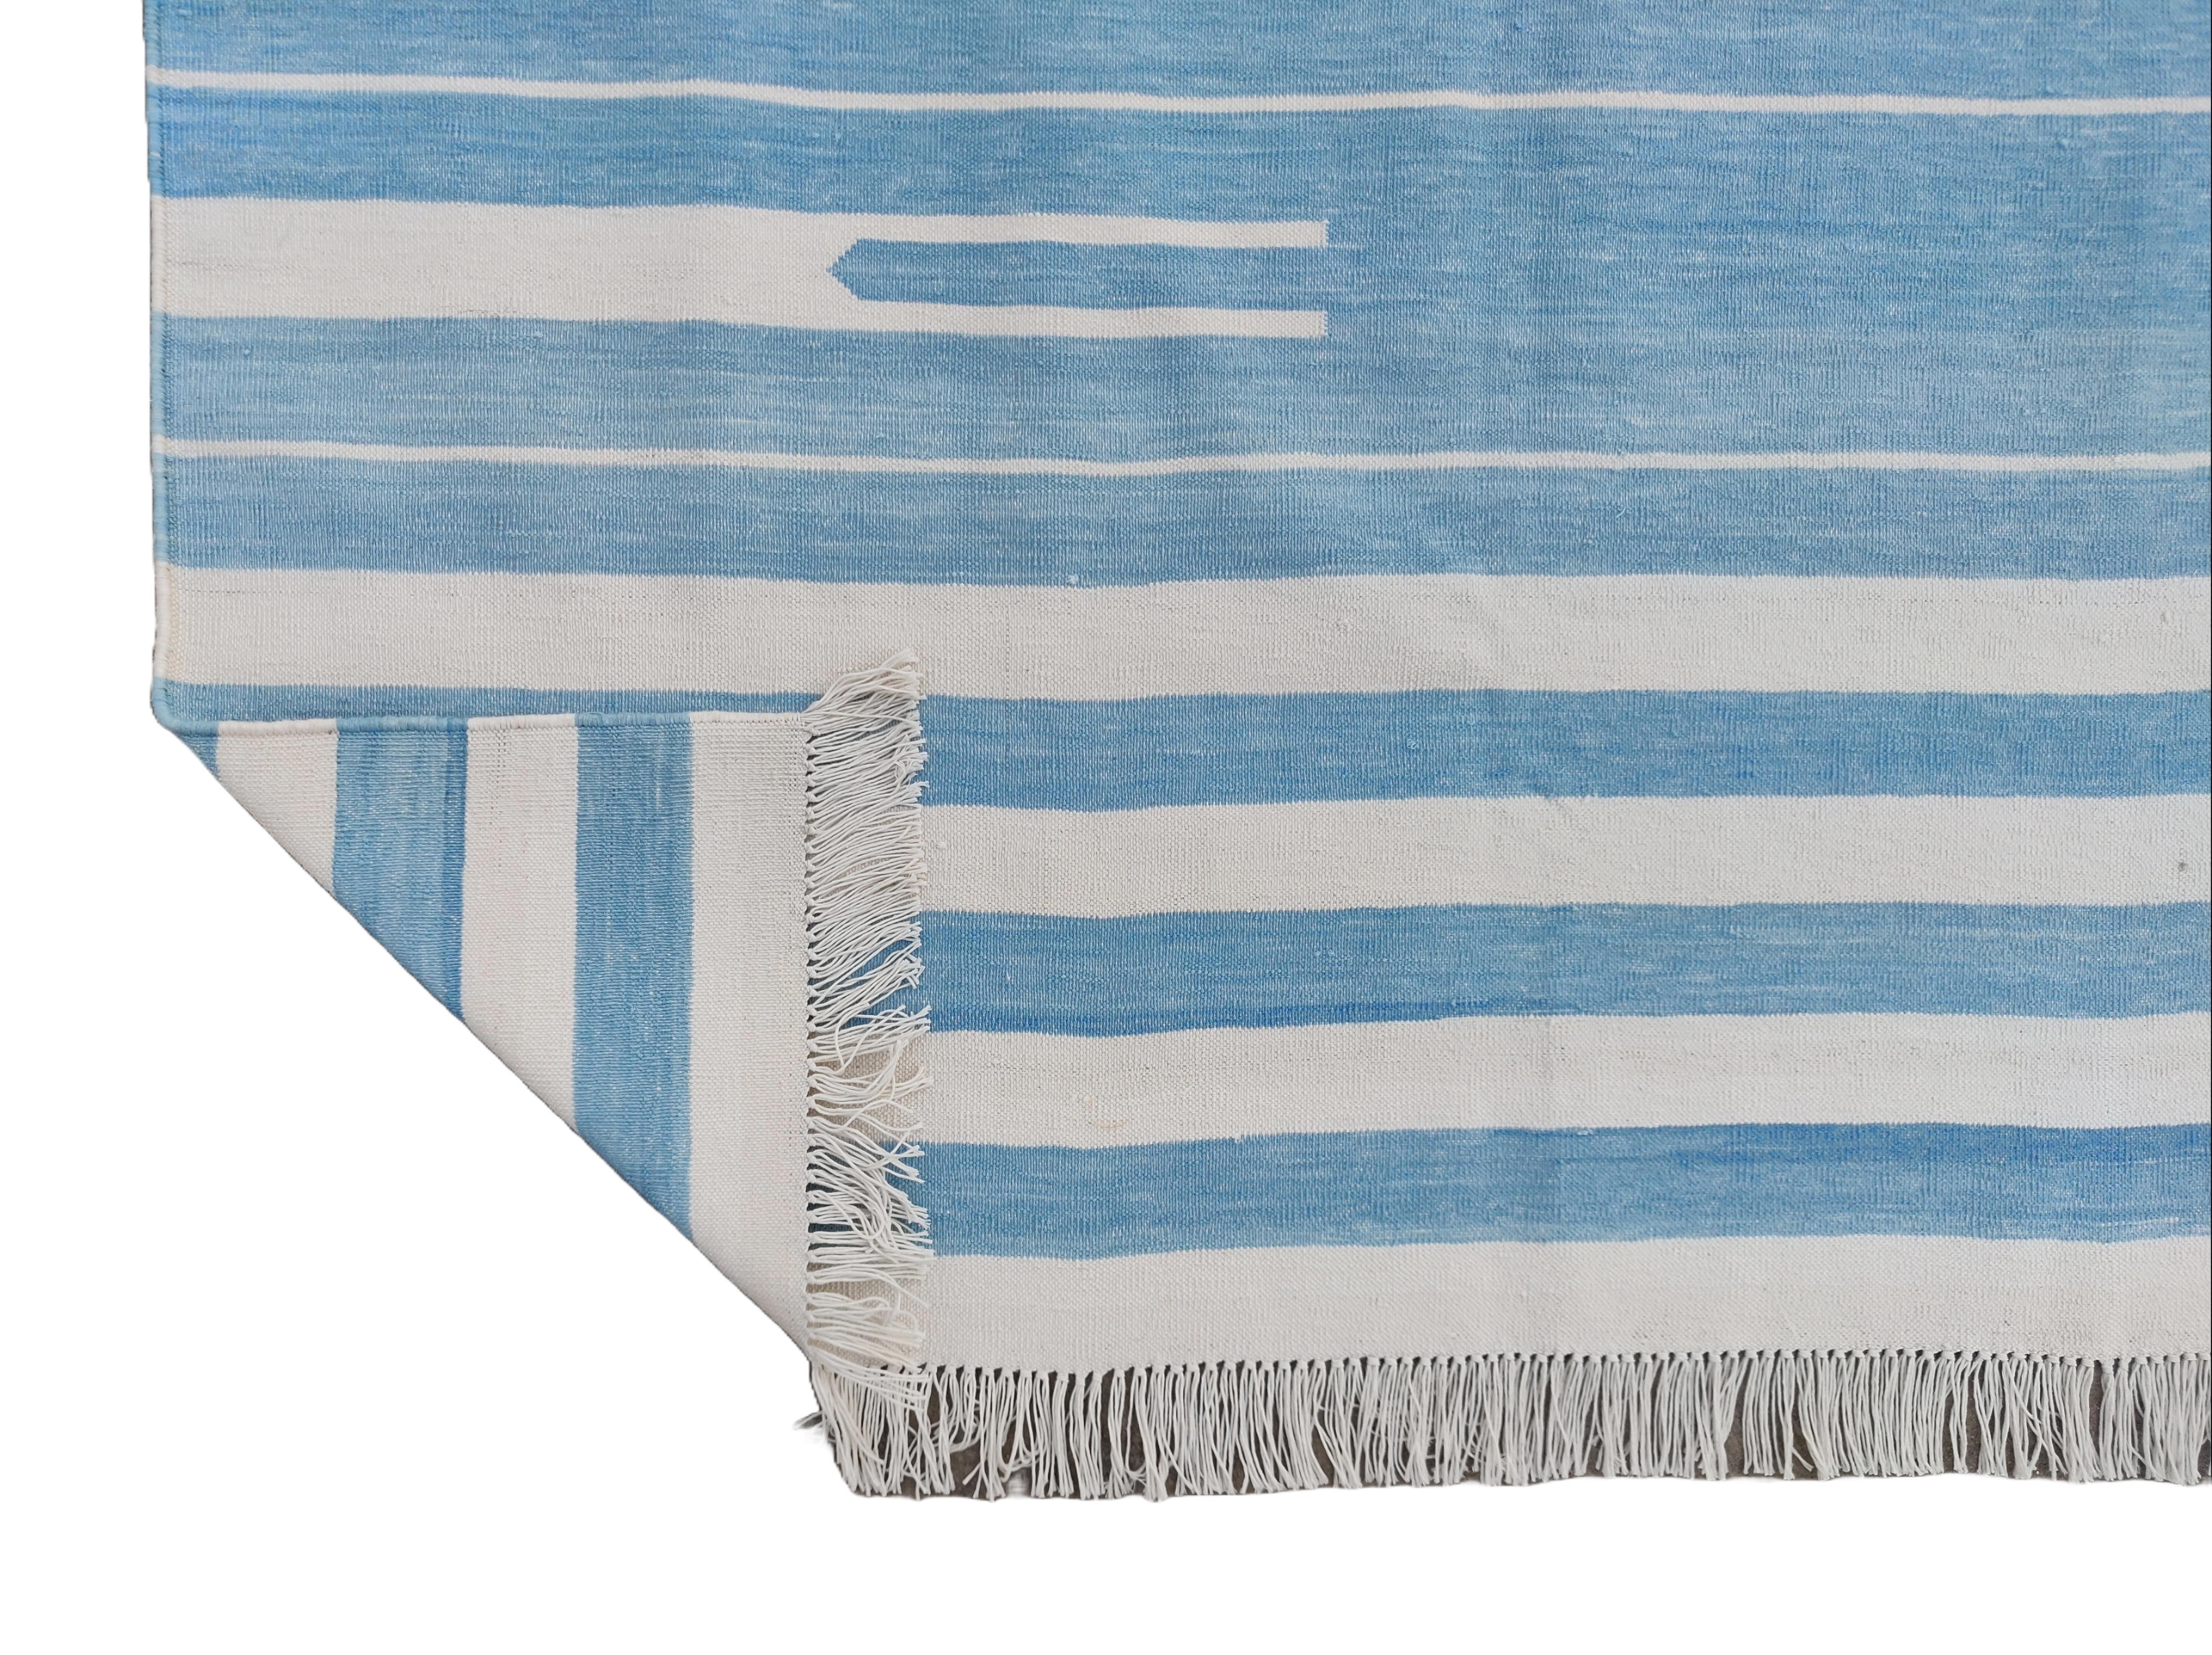 Hand-Woven Handmade Cotton Area Flat Weave Rug, Blue And White Striped Indian Dhurrie Rug For Sale